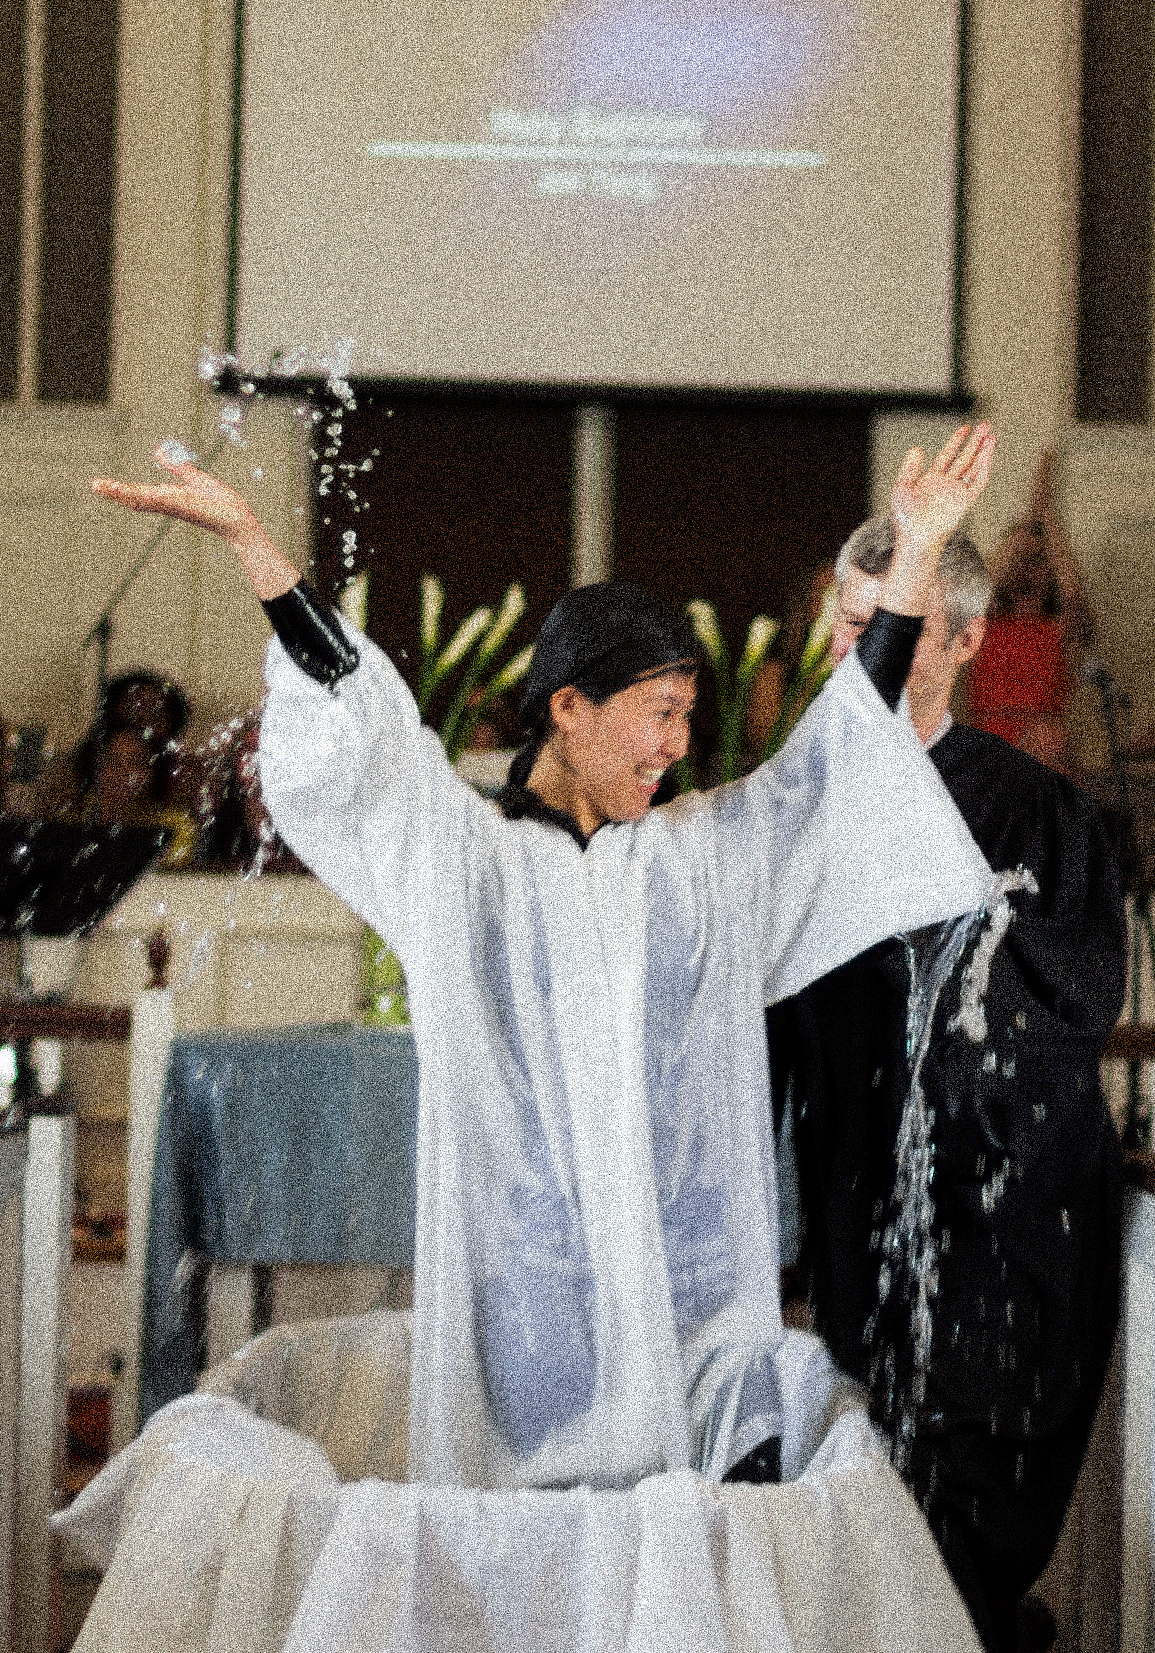 A women throwing her hands up in joy after getting baptized